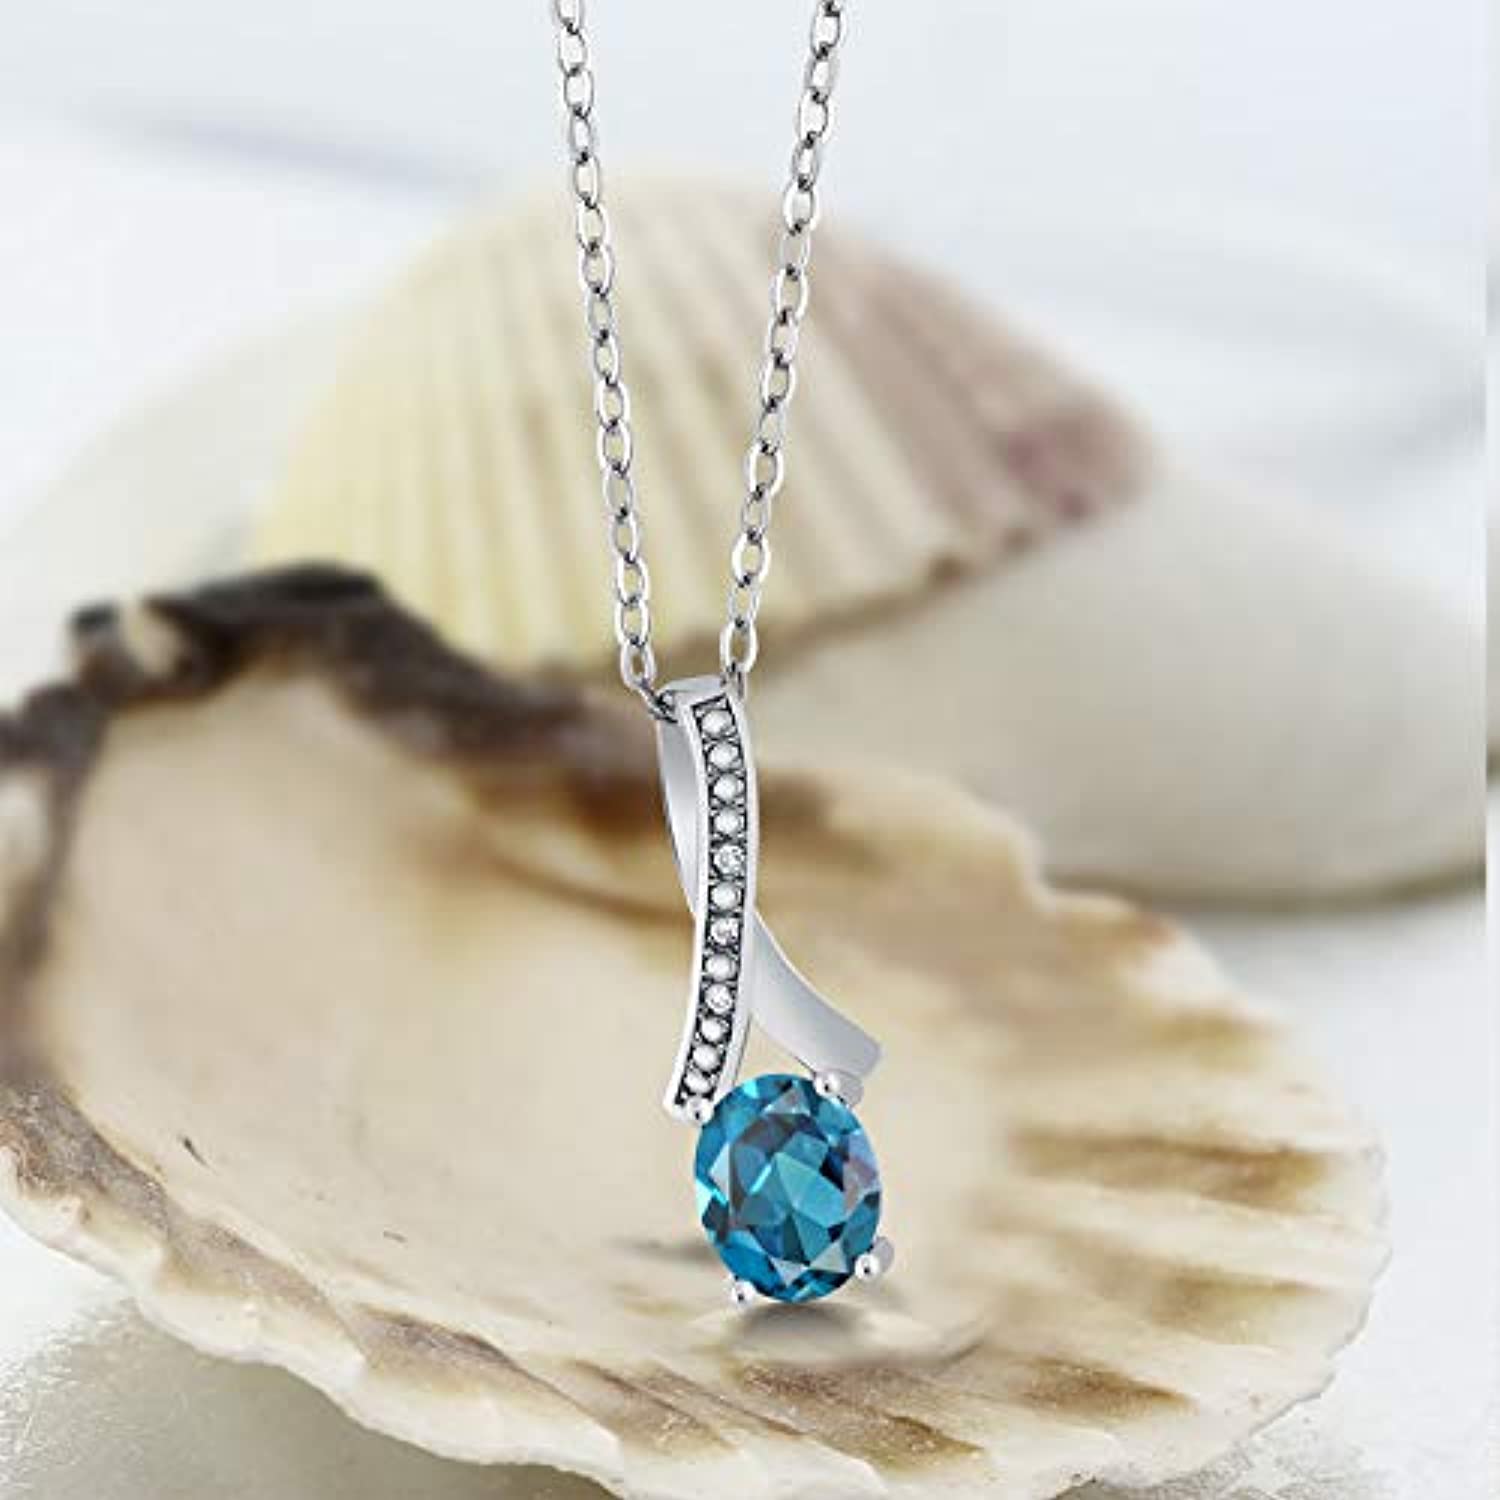 Sterling Silver Oval Gemstone Birthstone & cubic zirconia Pendant with 18 Inch Silver Chain